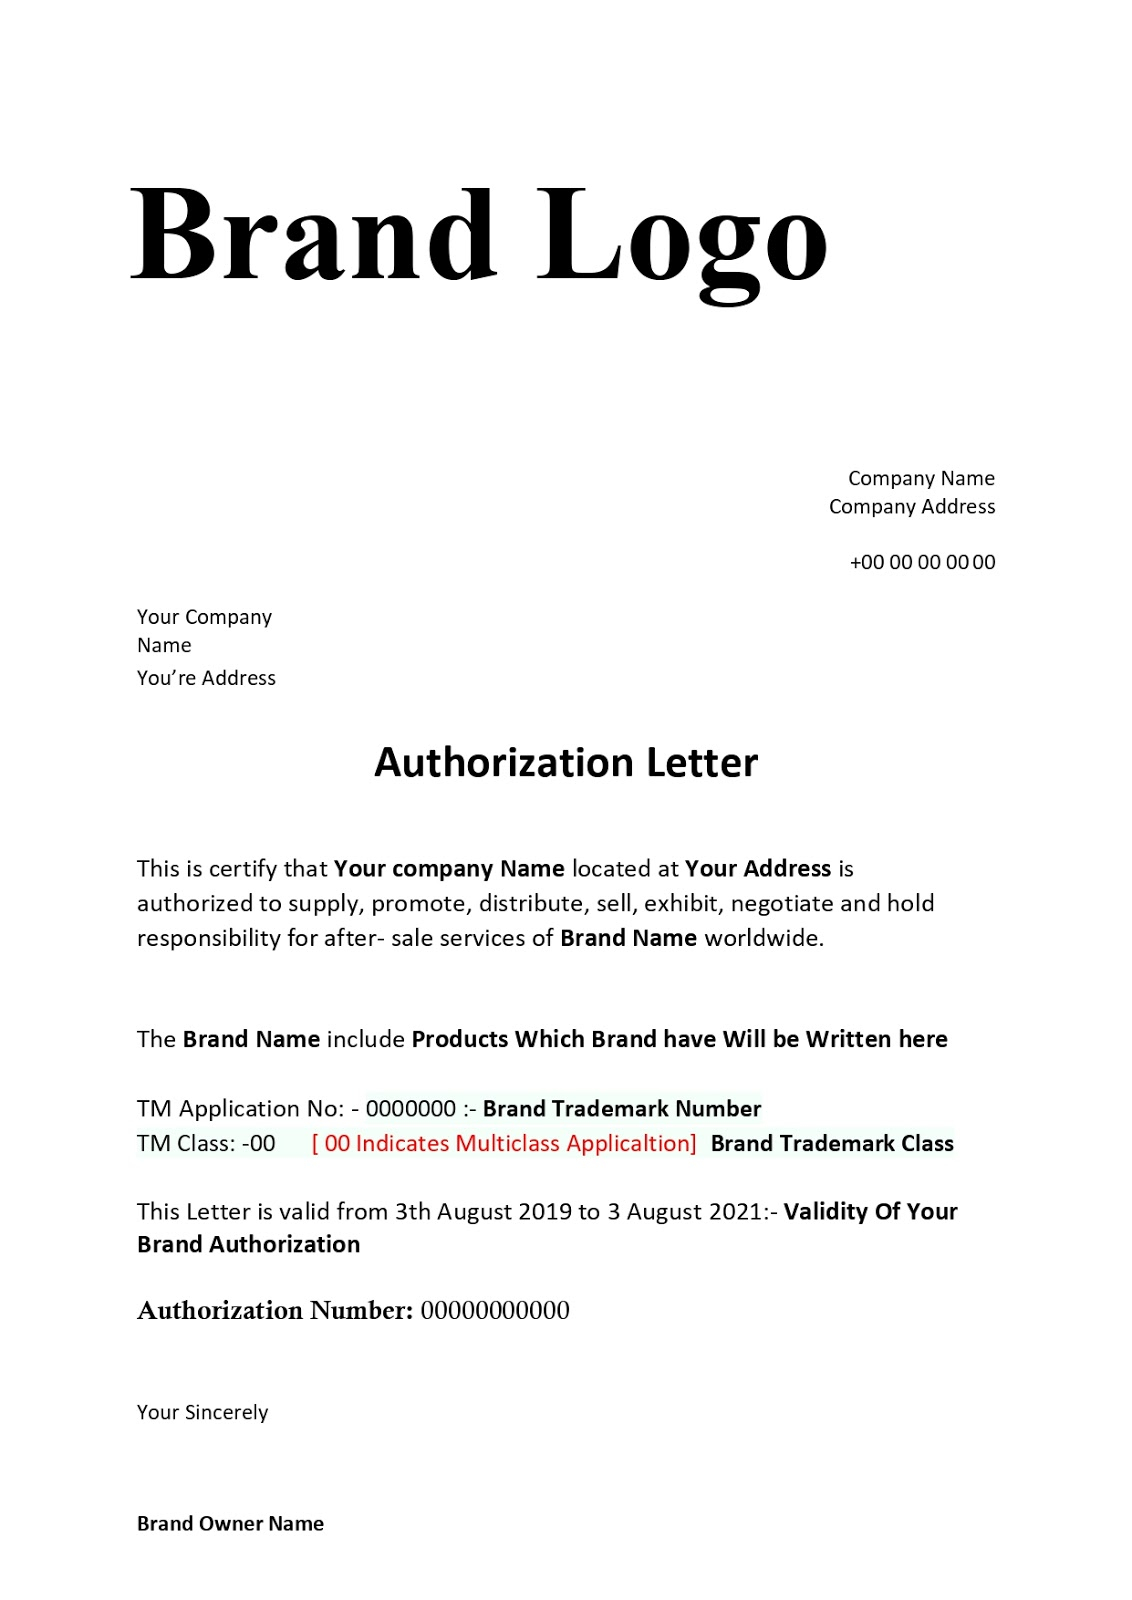 Brand Authorization Letter Format For Sellers Within Resale Certificate Request Letter Template